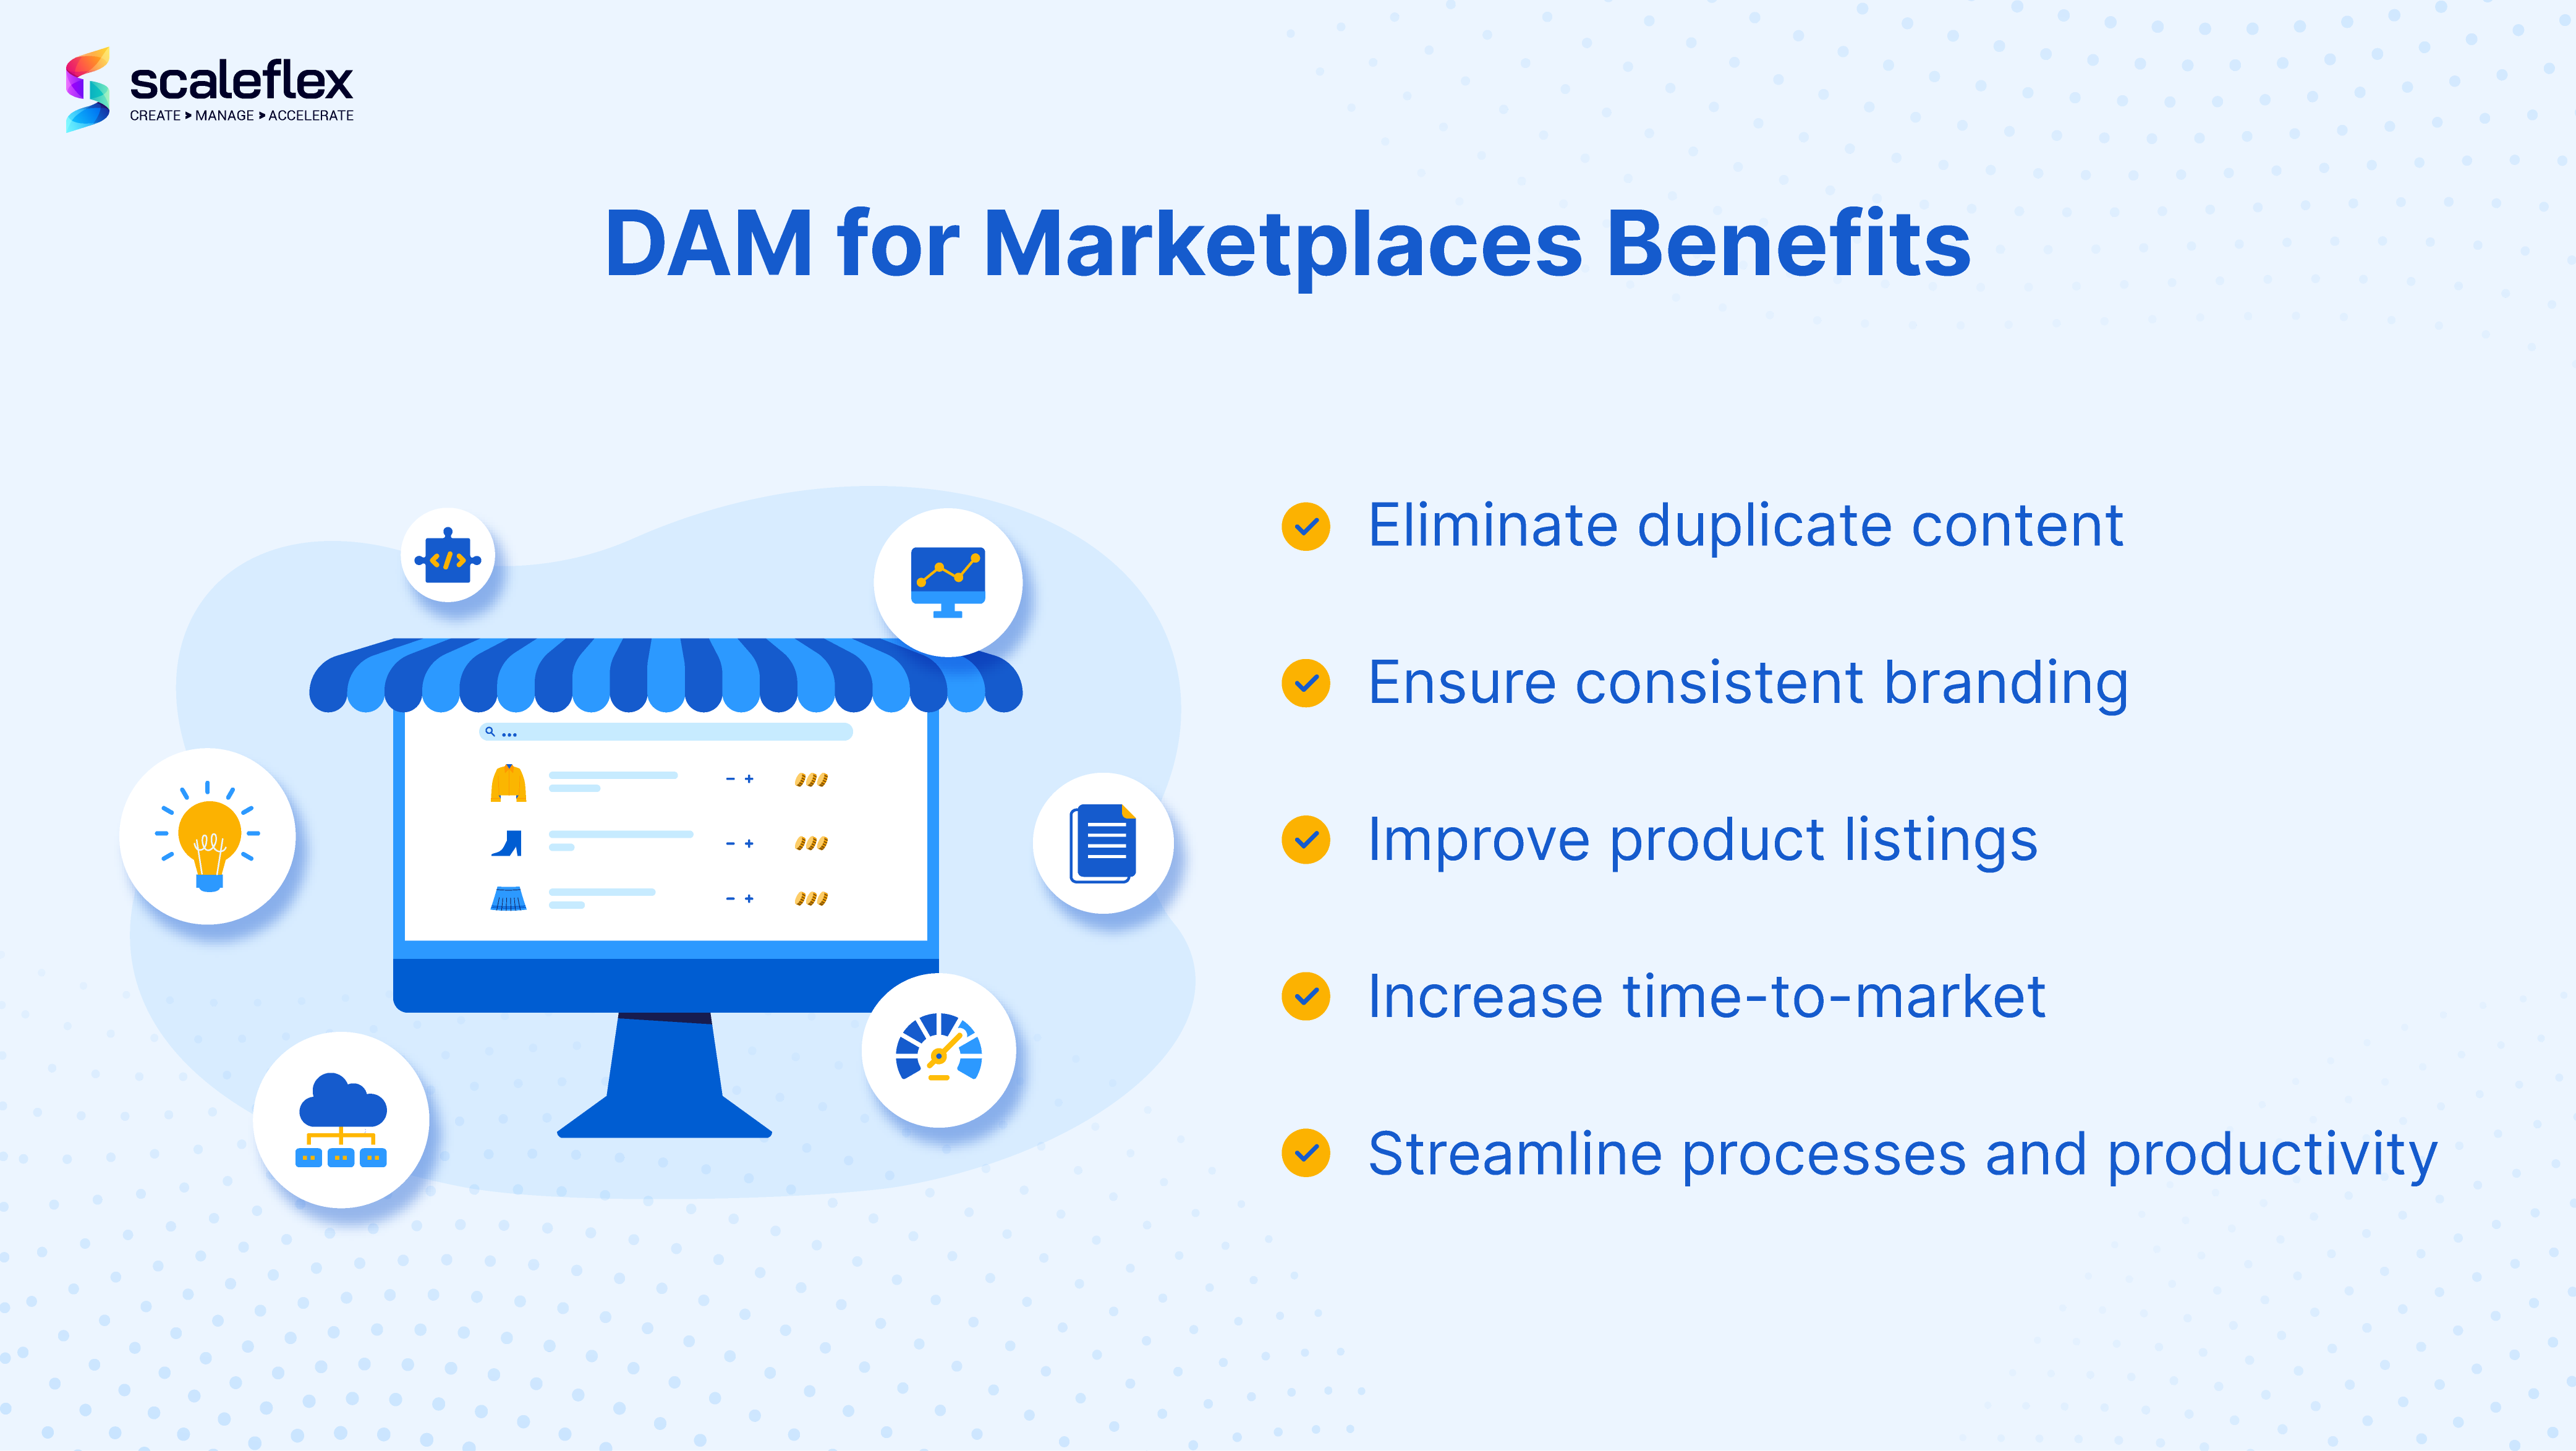 Benefits of DAM for Marketplaces